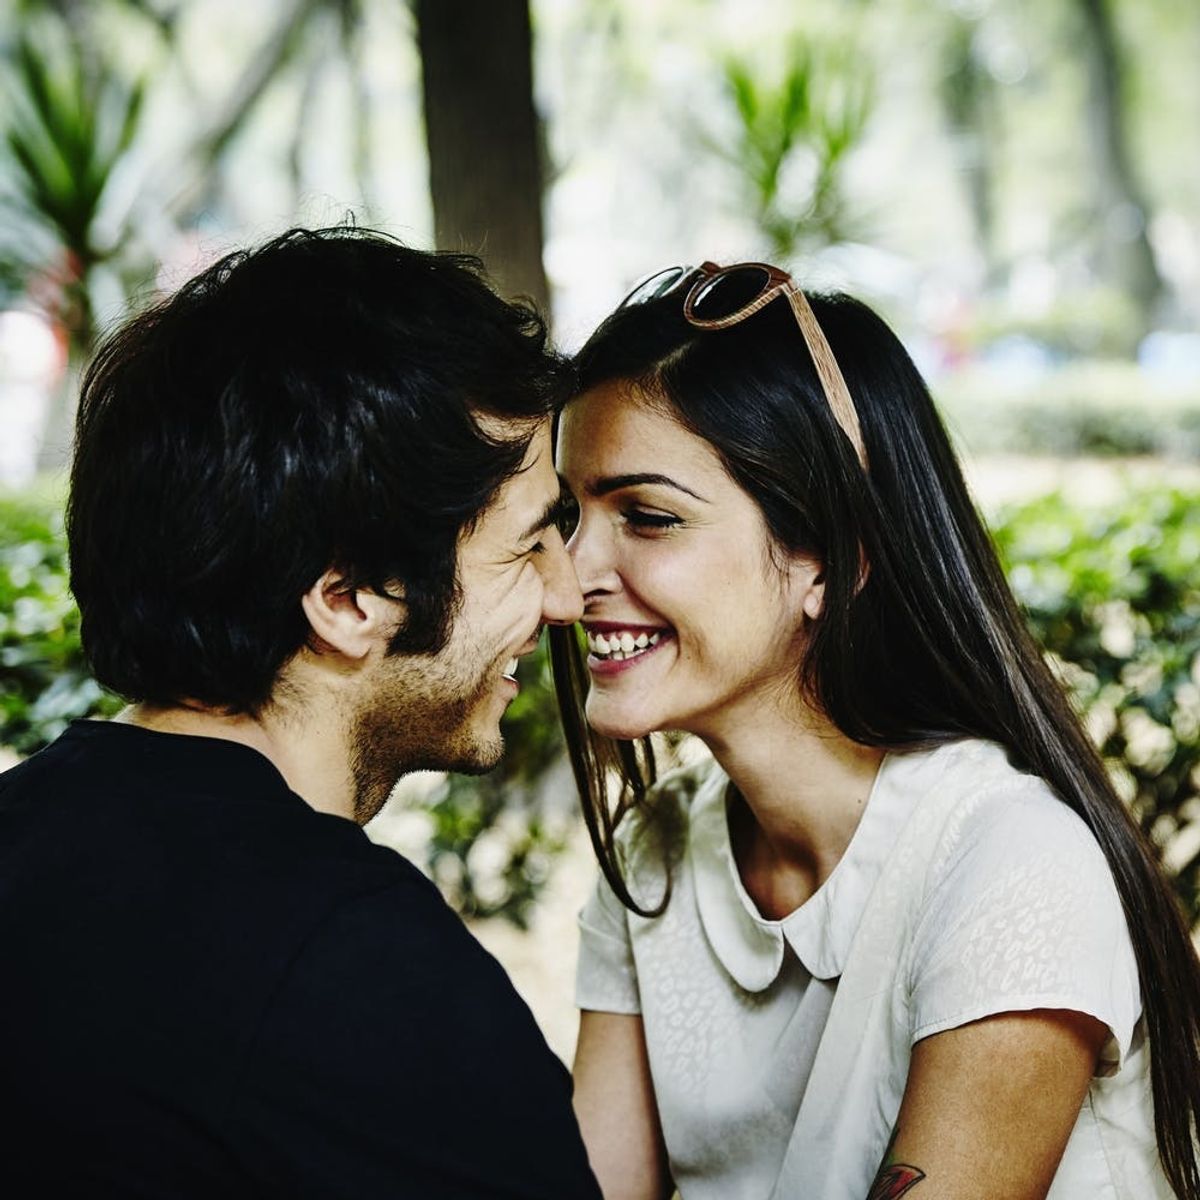 This Is the Astrological Sign That Affects Your Love Life